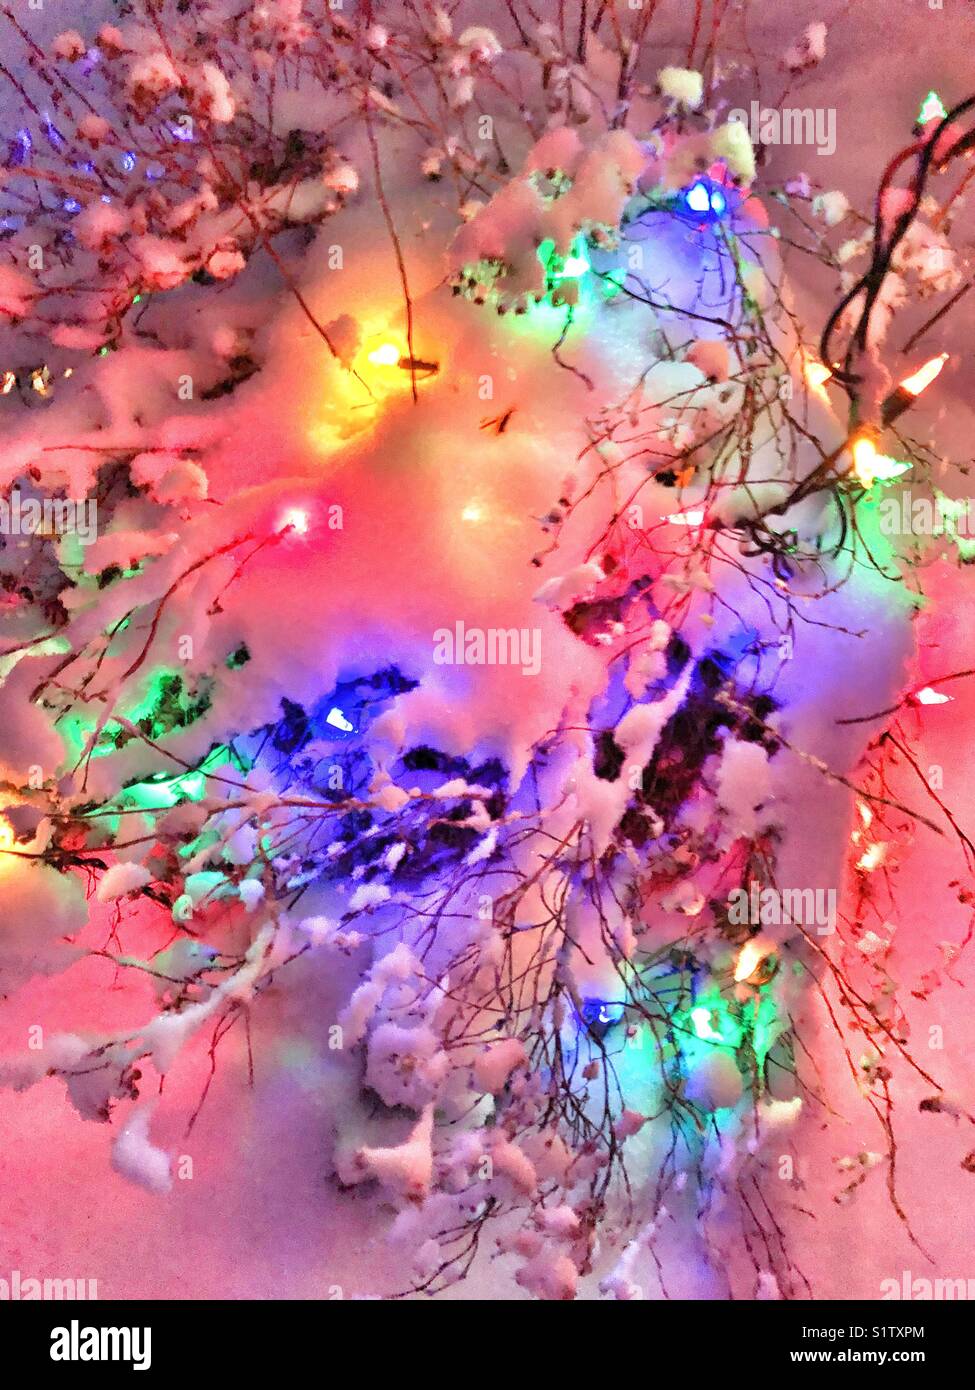 Fresh snow covering bush with multicoloured Christmas lights Stock Photo